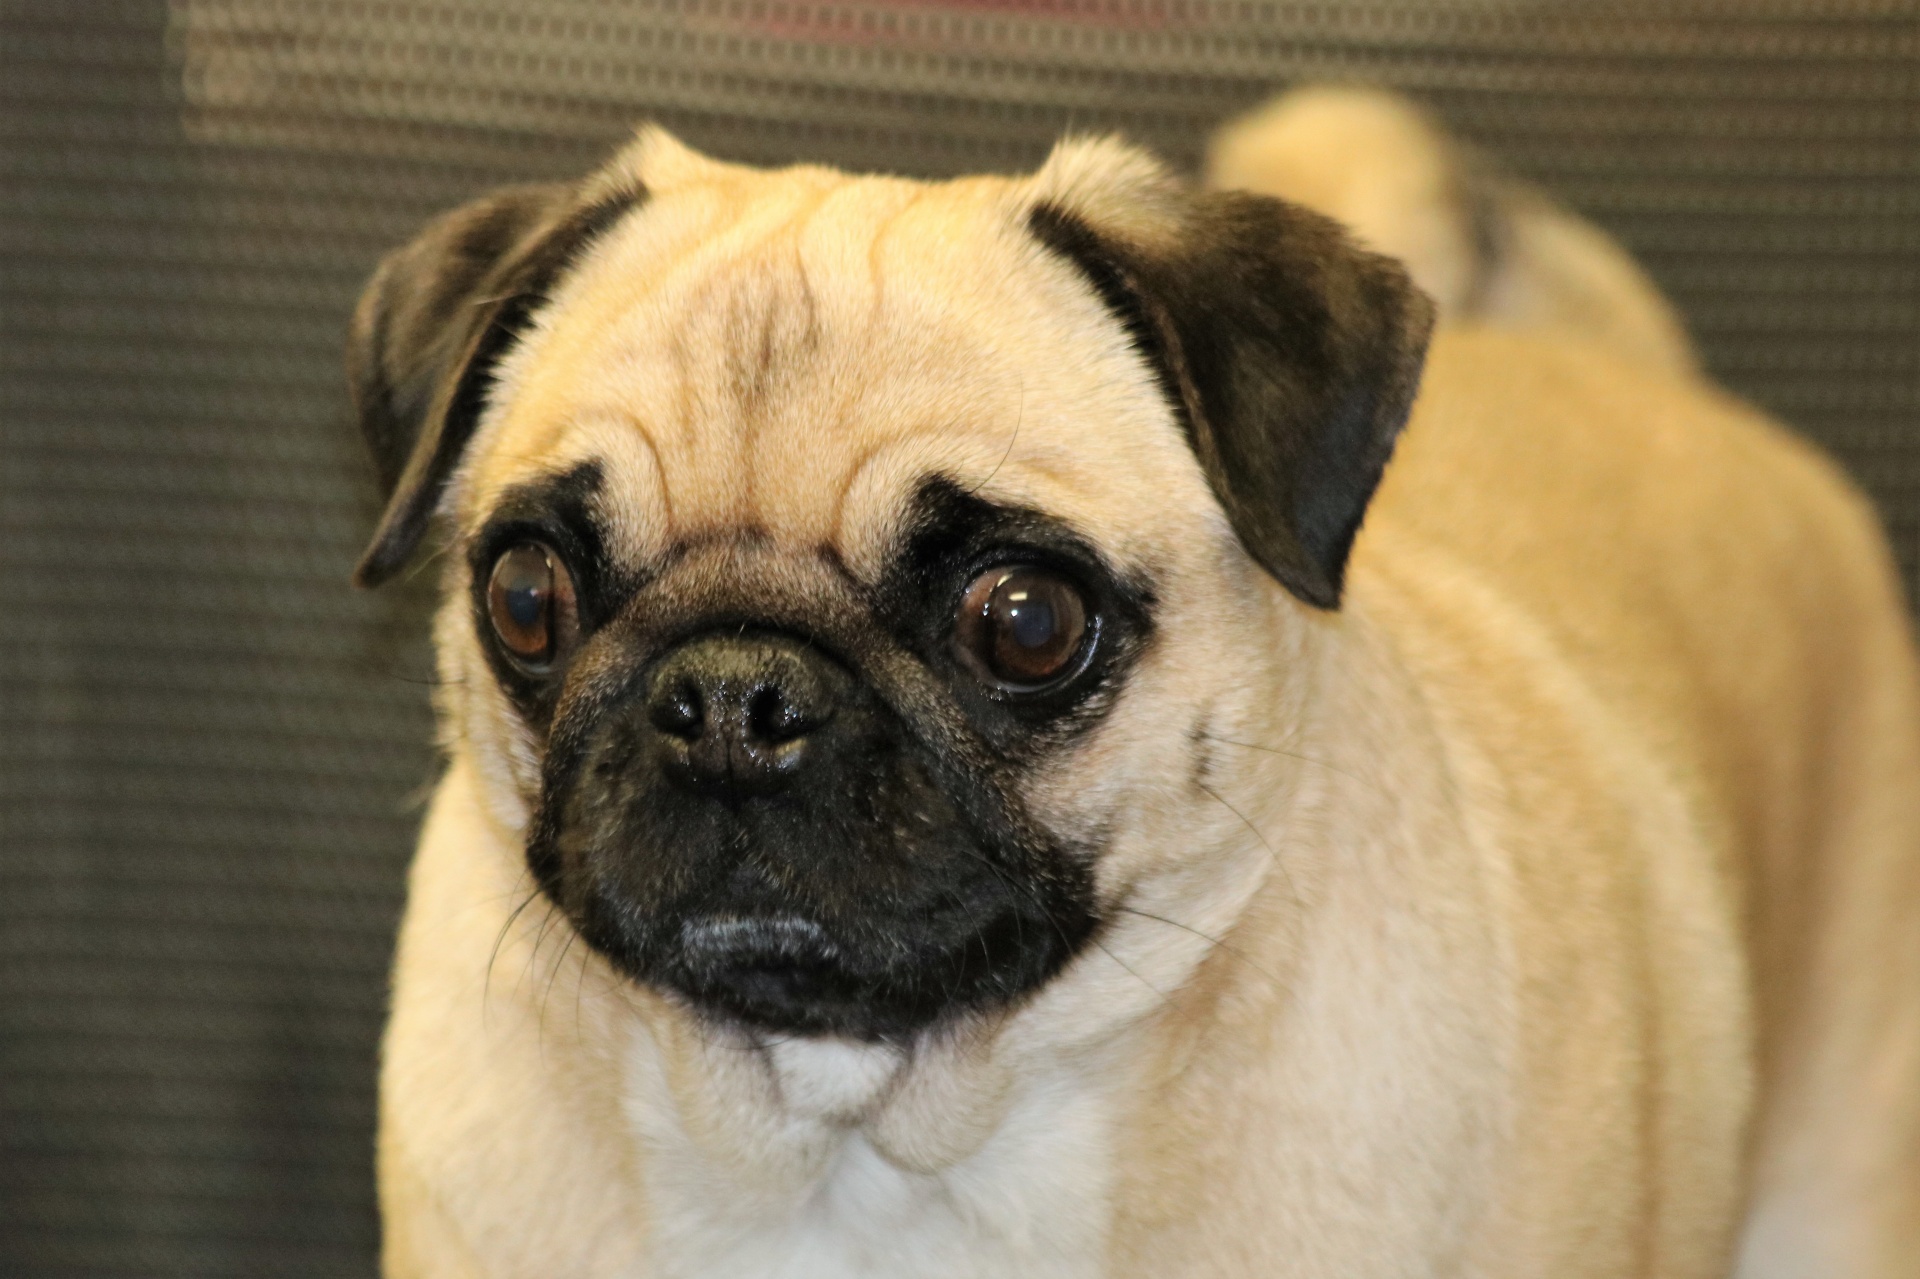 Portrait shot of a cute little pug dog with tan body and black face and ears, on a blurred gray background.